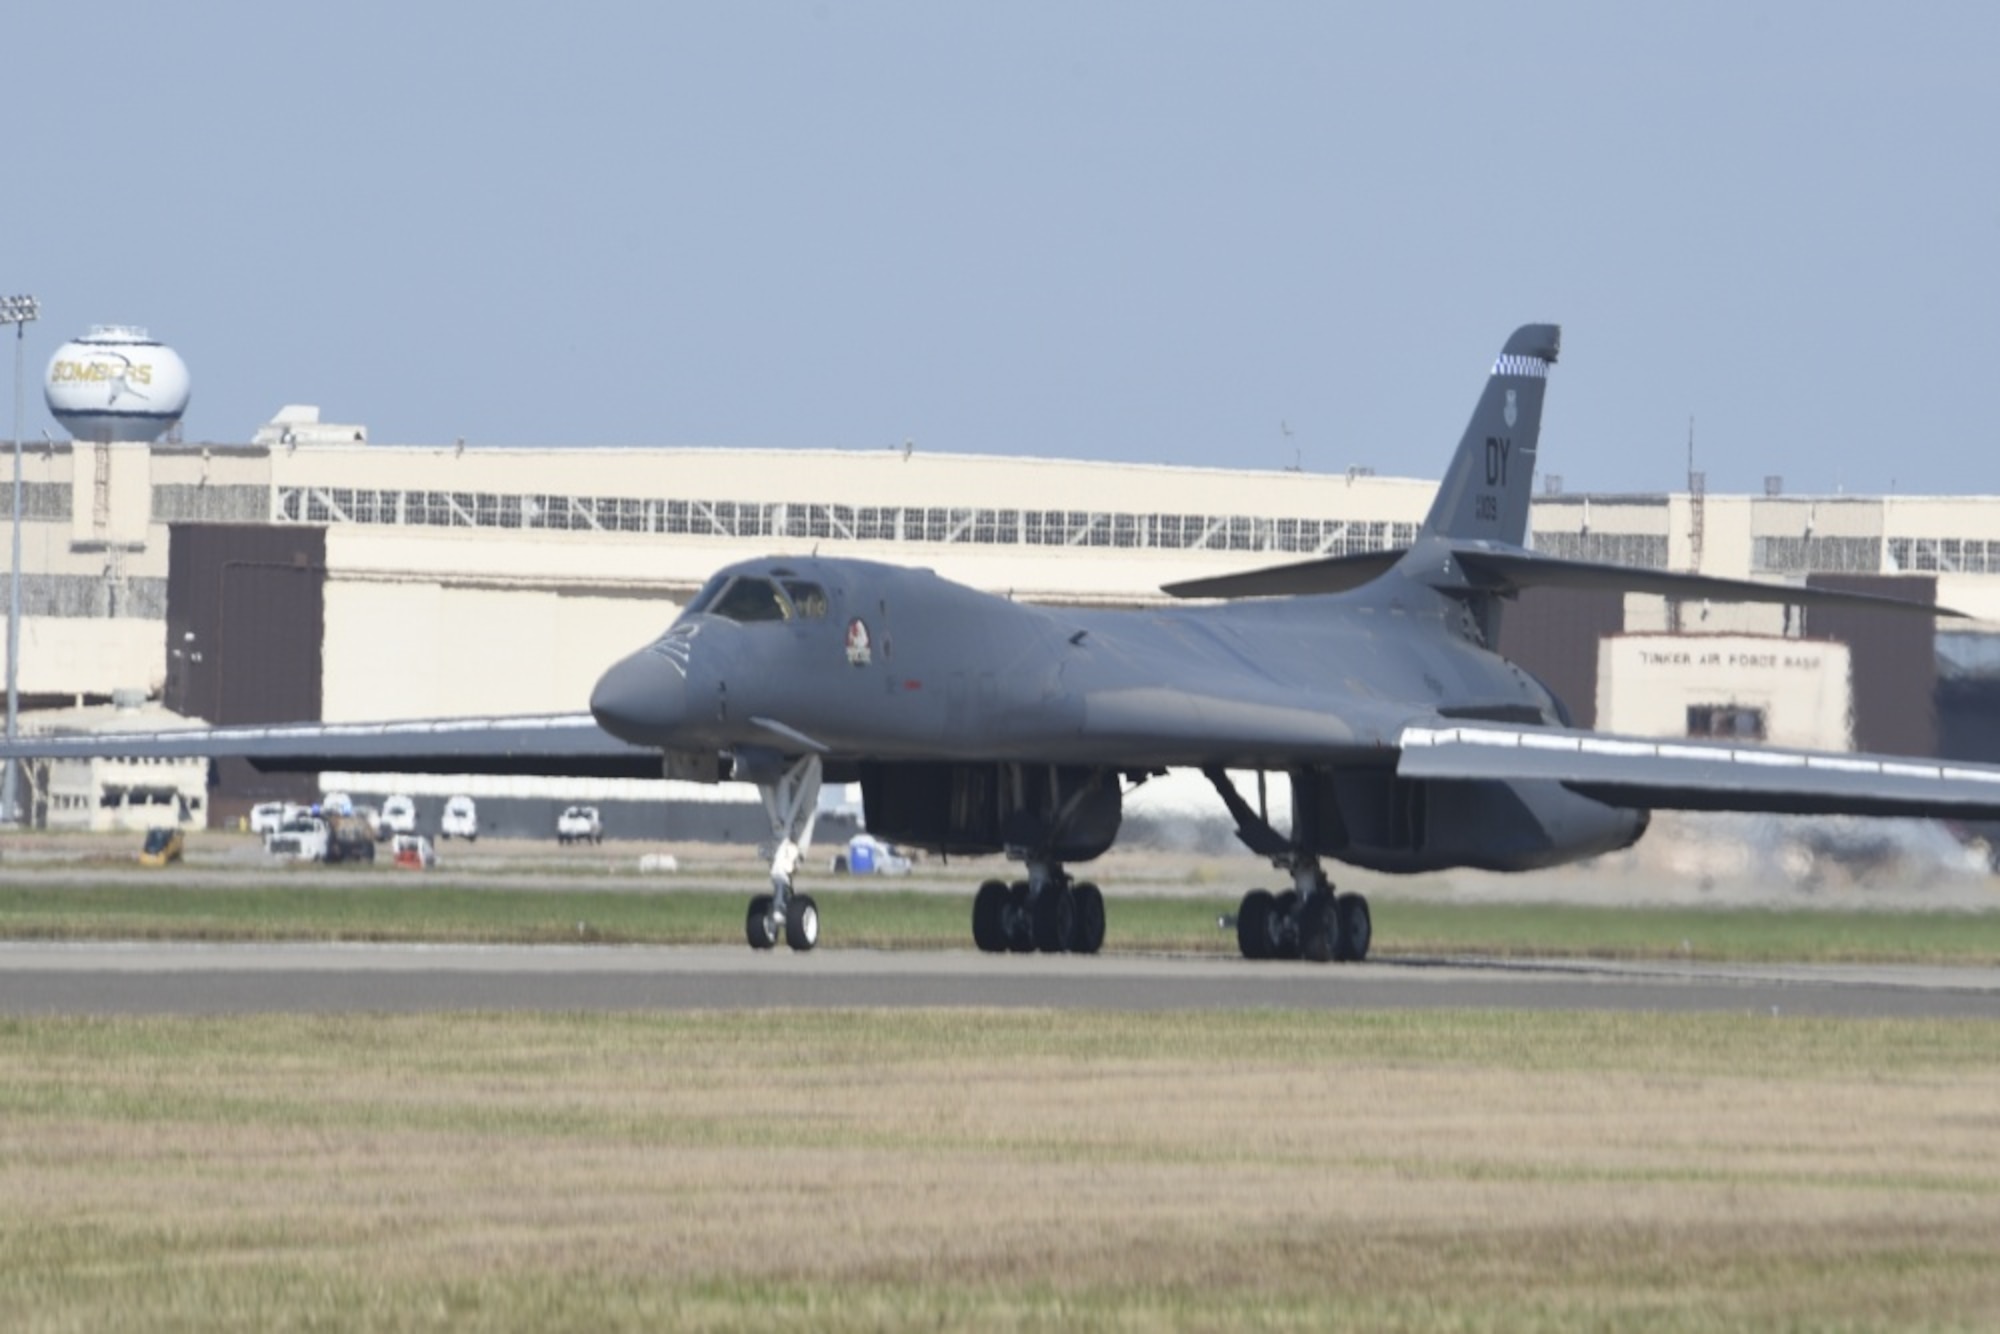 B-1B Lancer, 86-0109, taxis toward the parking ramp at Tinker Air Force Base, Oklahoma, Oct. 26, 2018, after a ferry flight from Midland International Air and Space Port before induction to depot-level maintenance and upgrades with the Oklahoma City Air Logistics Complex. During a routine training flight May 1, the Dyess AFB based B-1B had an in-flight emergency resulting in an attempted ejection. The first crewmembers’ seat failed to deploy and the aircraft commander halted the ejection sequence and heroically saved the aircraft and crew by landing at Midland International Air & Space Port.